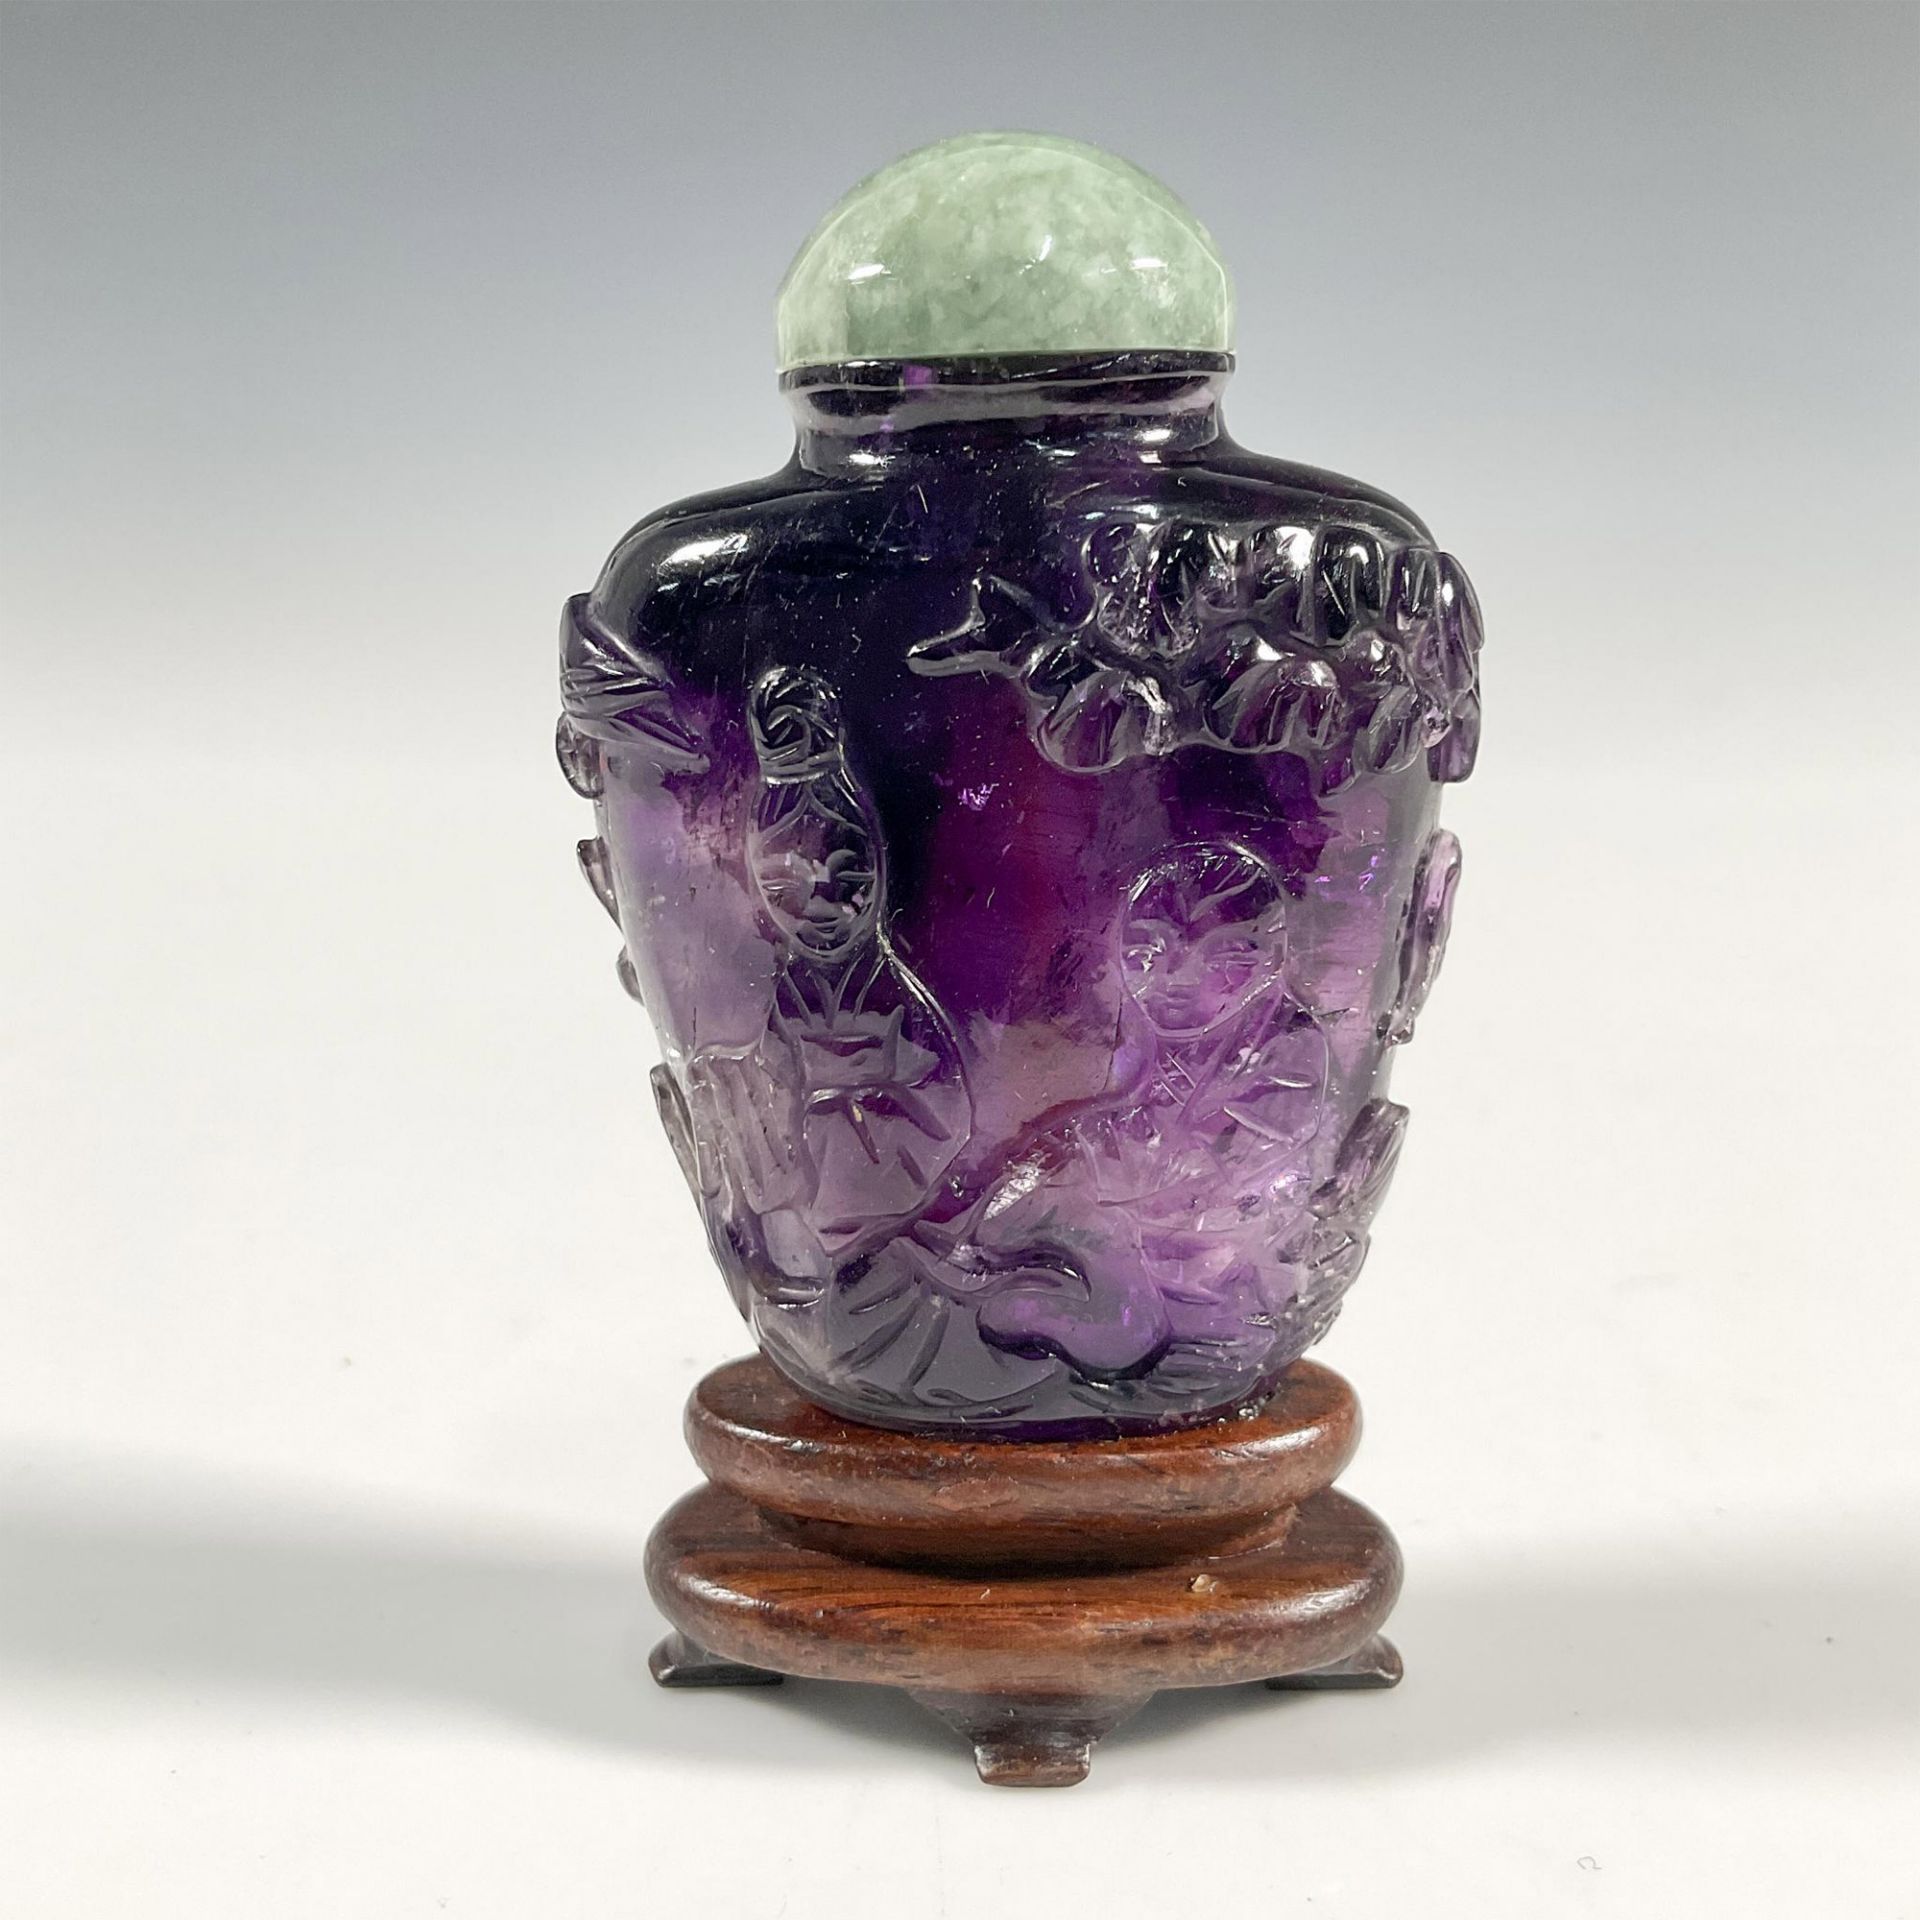 Chinese Amethyst Snuff Bottle with Jadeite Stopper - Image 2 of 3